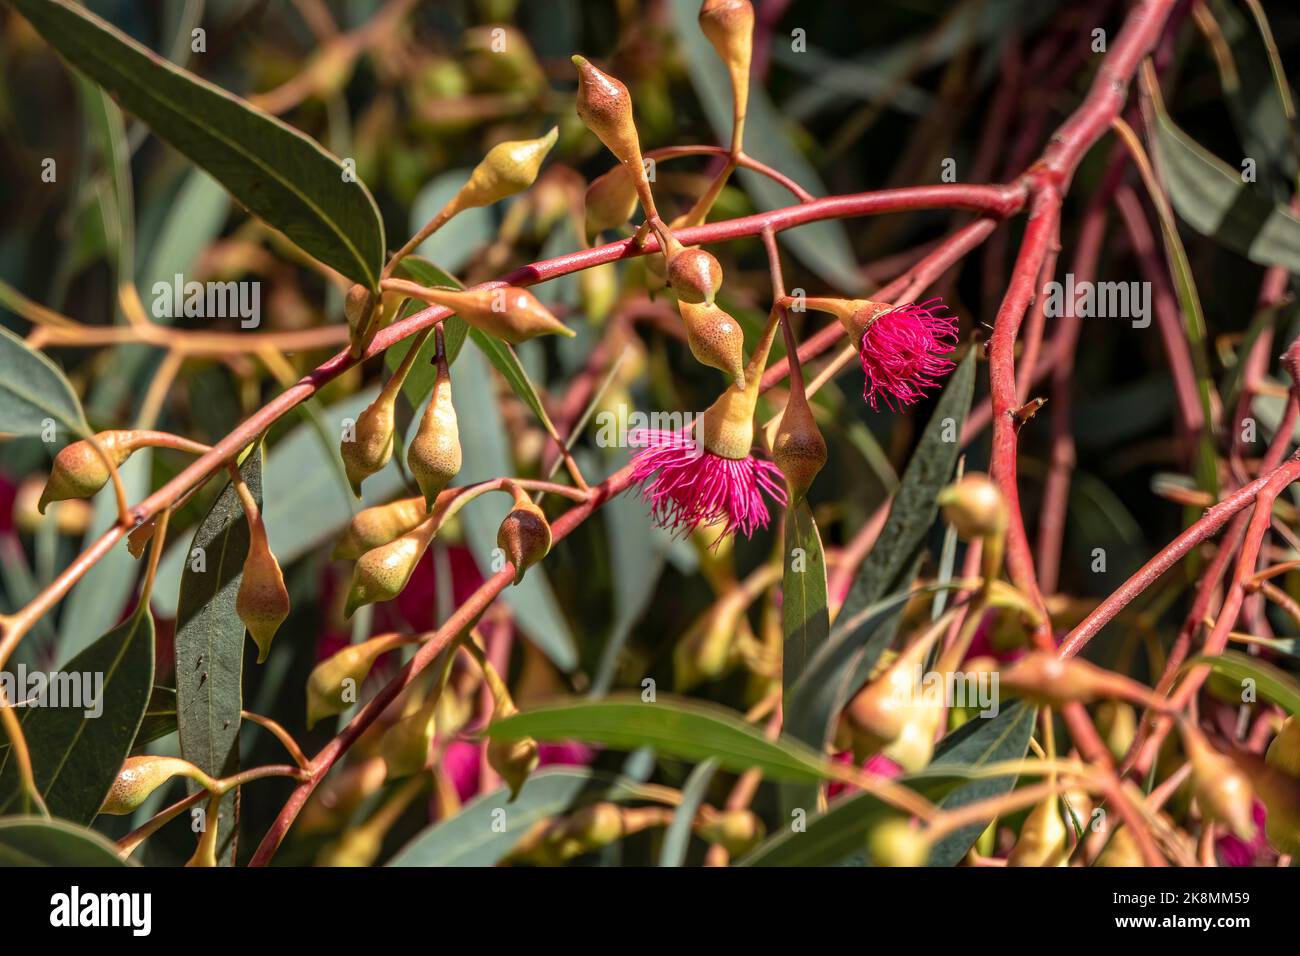 Buds and pink flowers of a flowering eucalyptus leucoxylon megalocarpa tree close up. Stock Photo